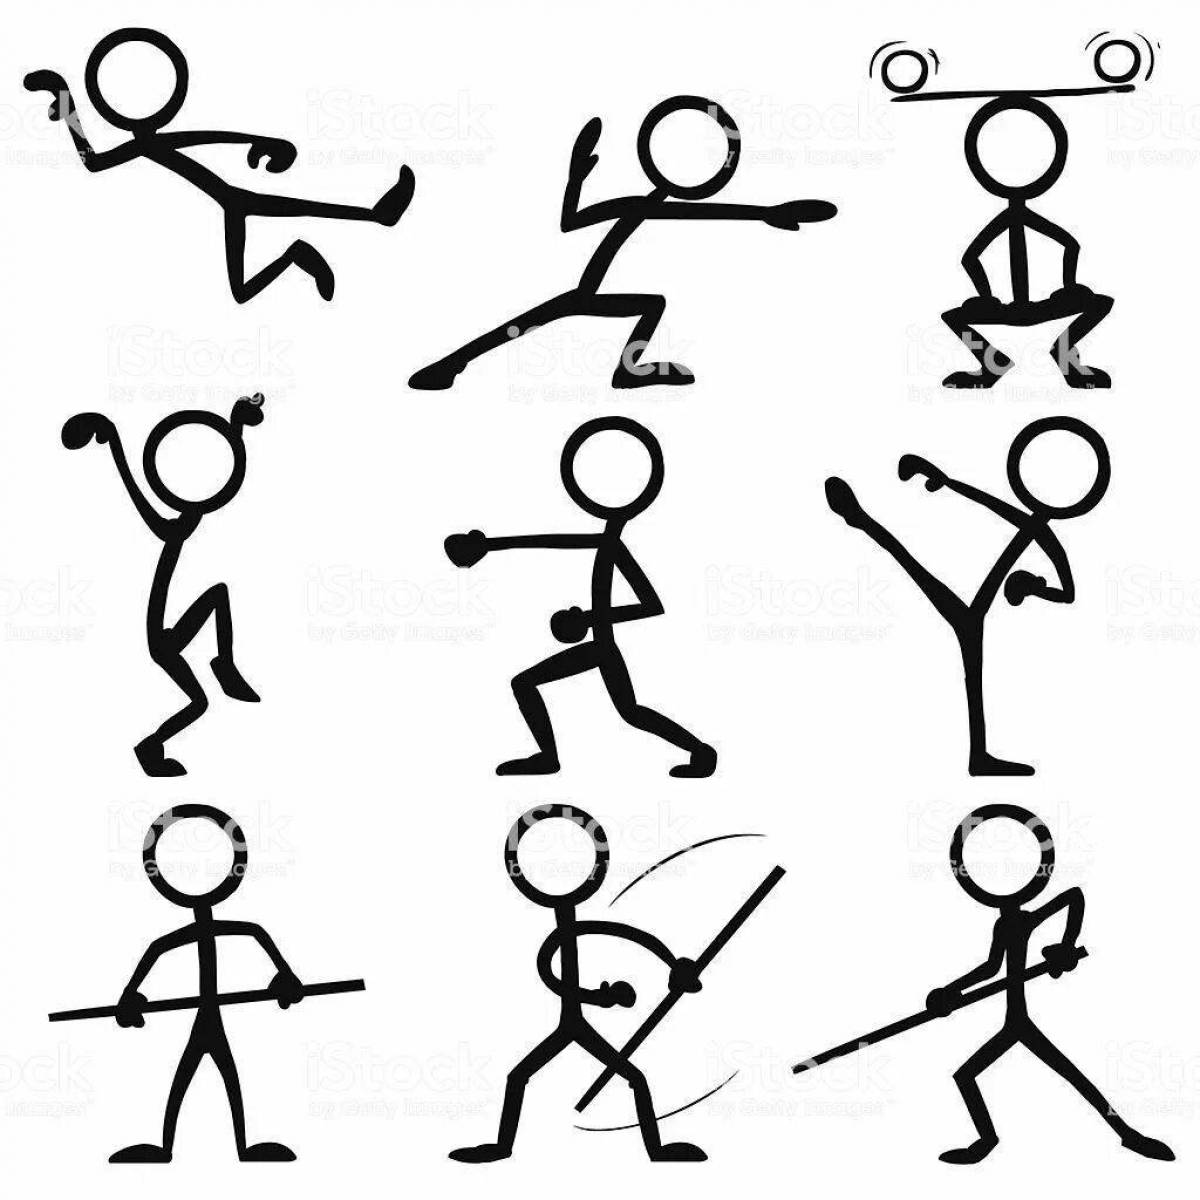 Animated stickman coloring page